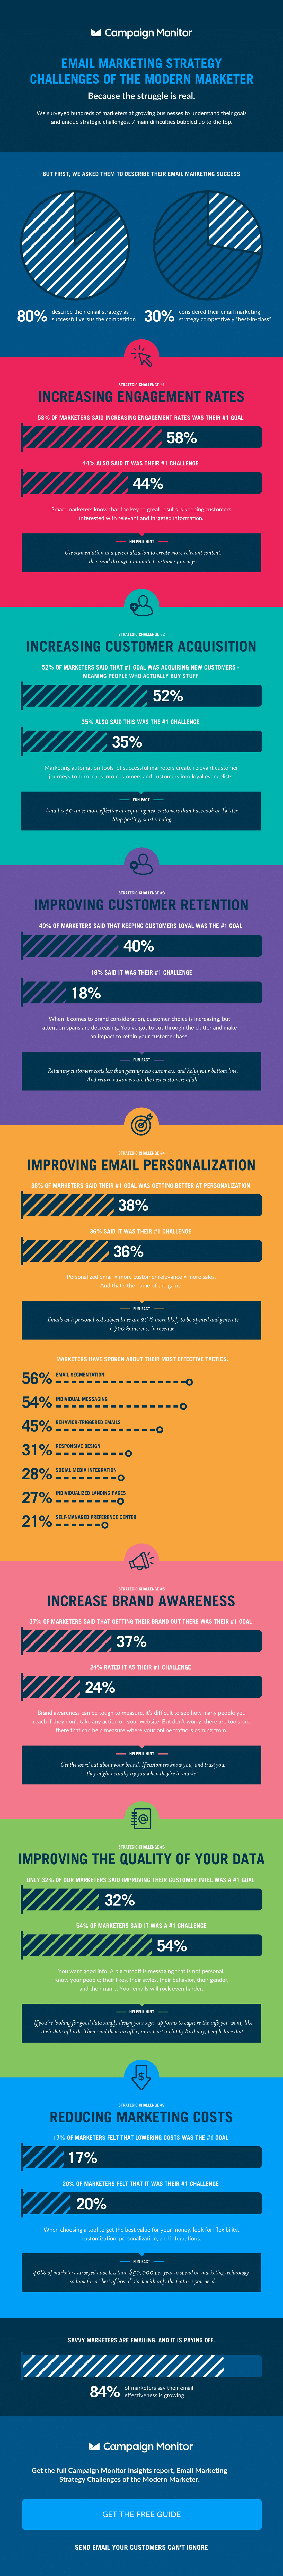 email strategy infographic